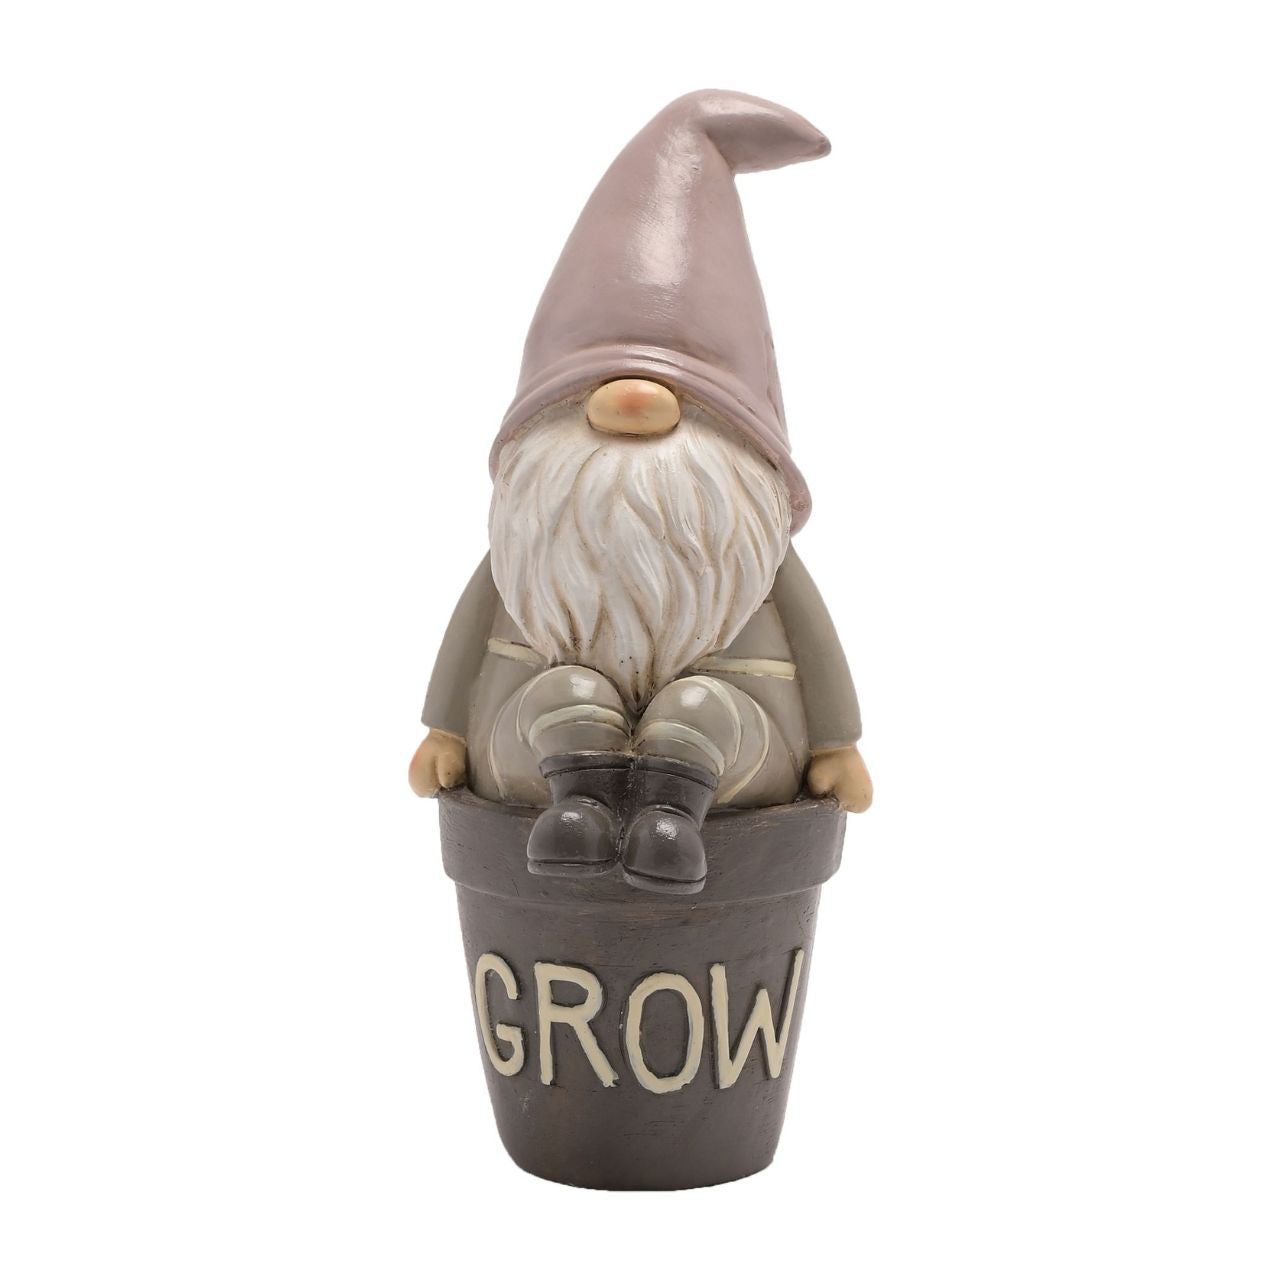 This fun-filled decoration will raise smiles and add character to gardens.  The hand painted resin garden decoration depicts a loveable gonk sitting upon a flowerpot that displays the word ‘Grow’ across the front. It showcases beautiful colouring throughout and offers versatile display options around the garden.